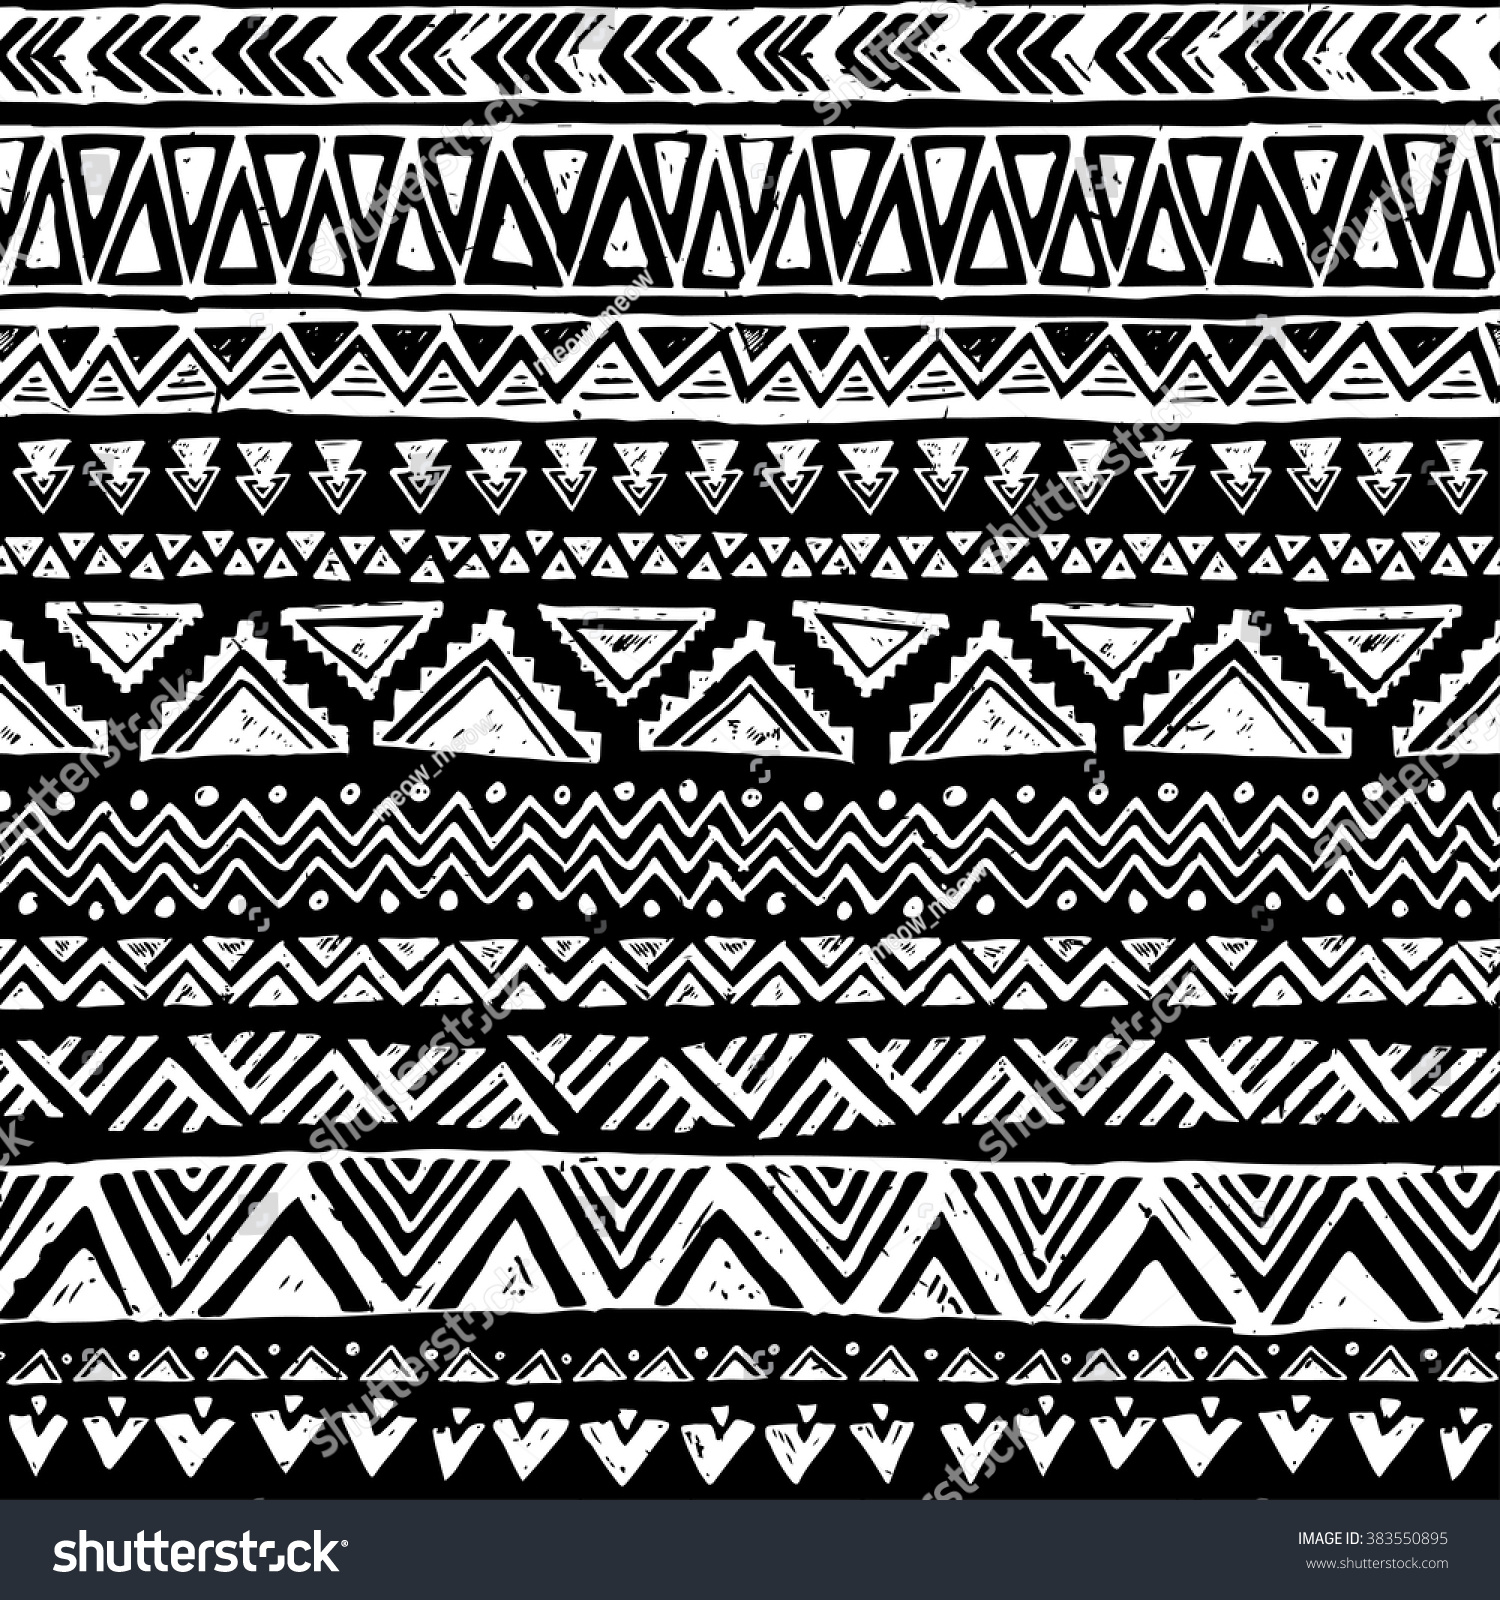 Black White Tribal Doodle Vector Seamless Stock Vector (Royalty Free ...